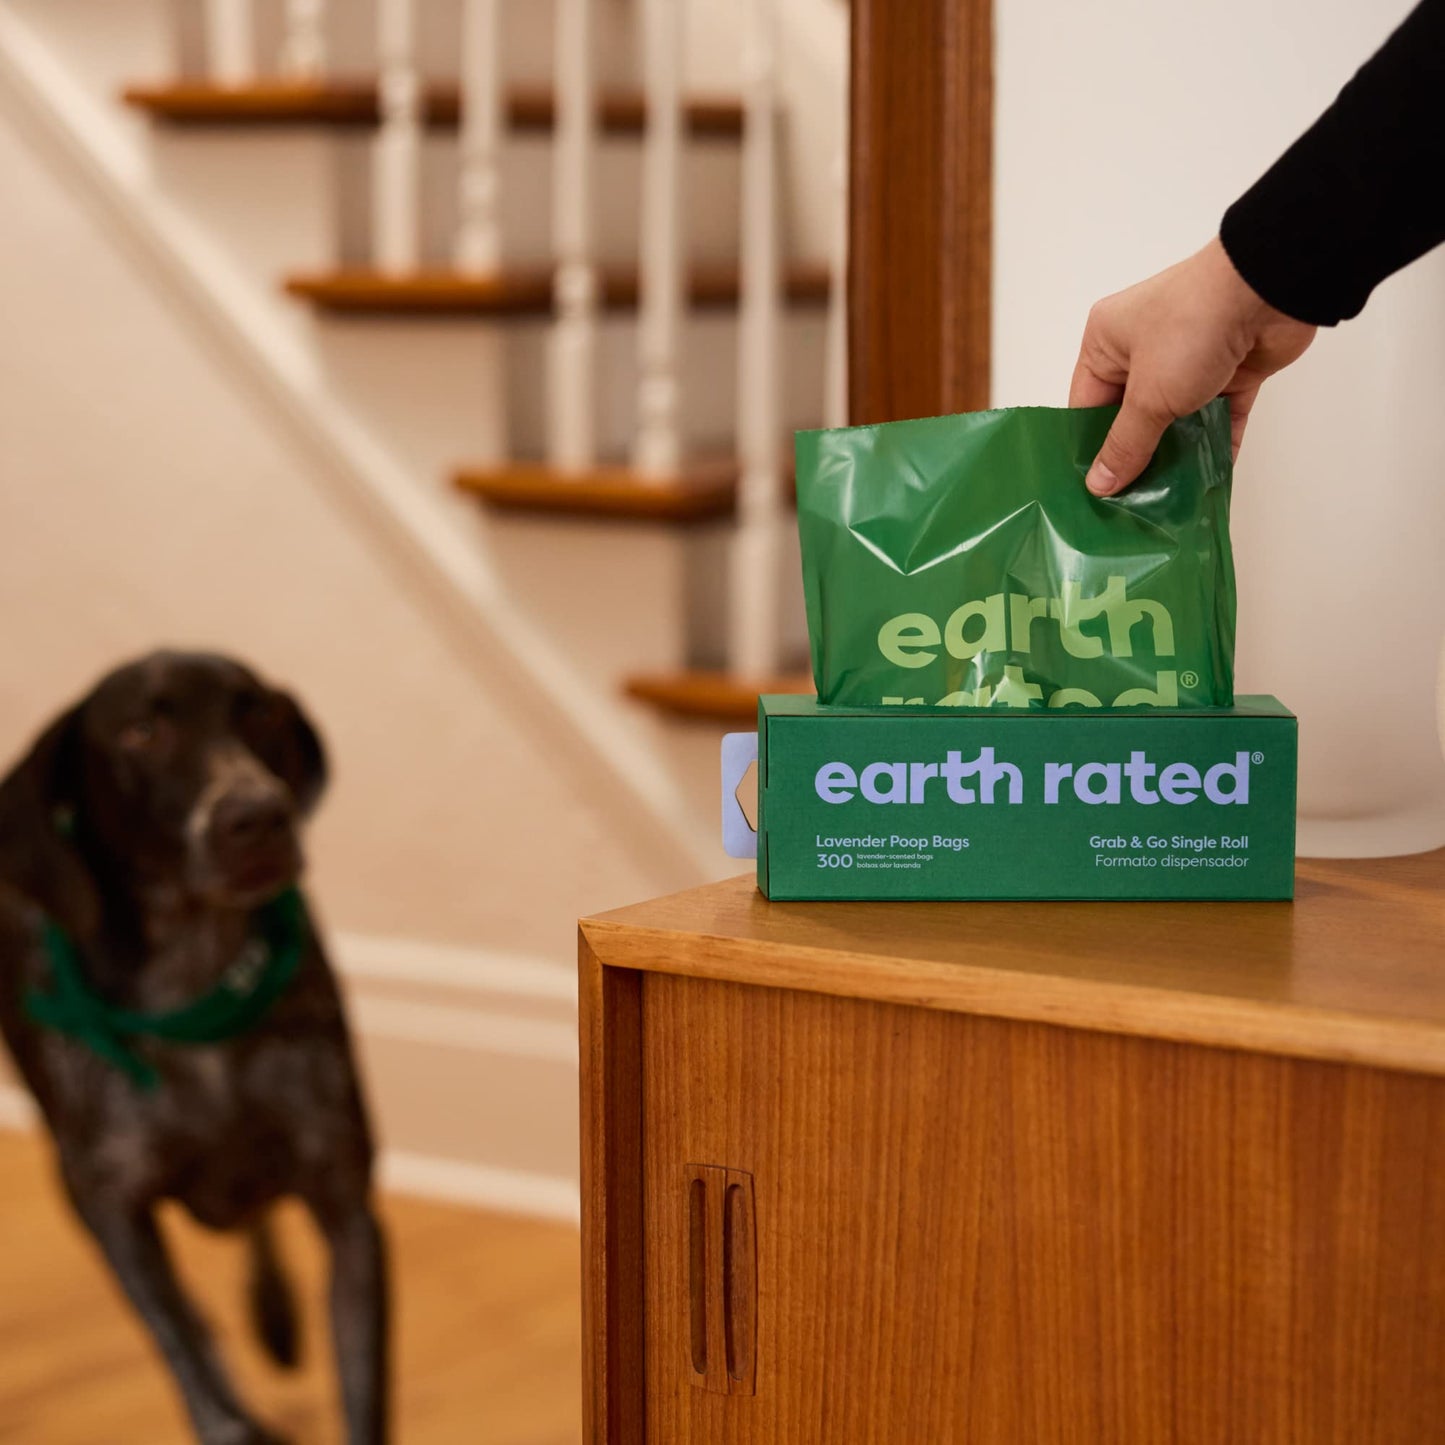 Earth Rated Dog Poop Bags, 300 Bags